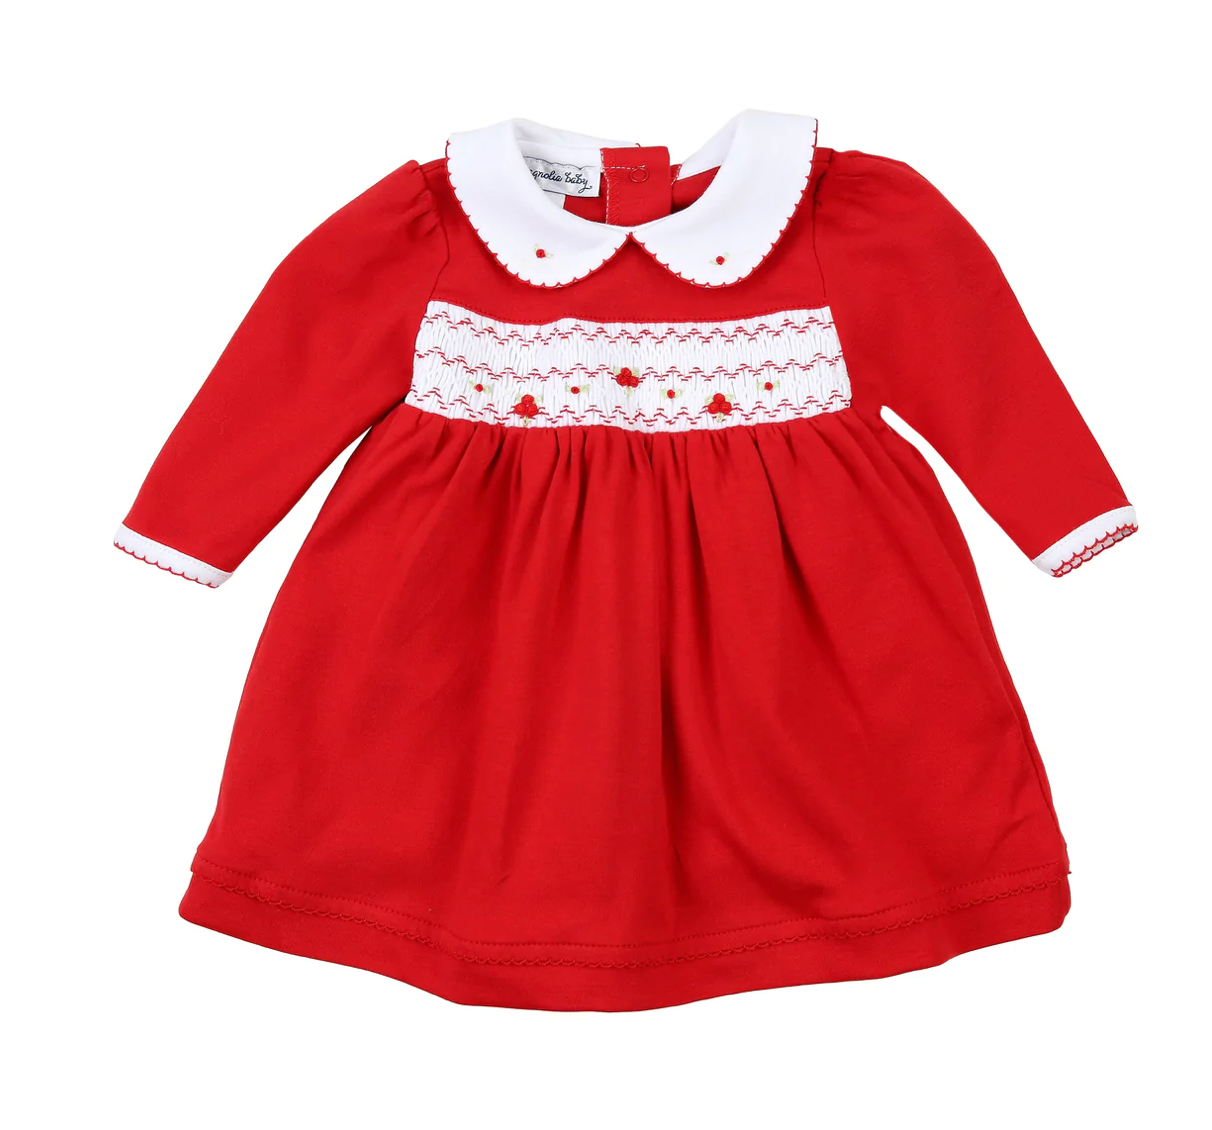 Clara and Colton Smocked Collared Girl Dress